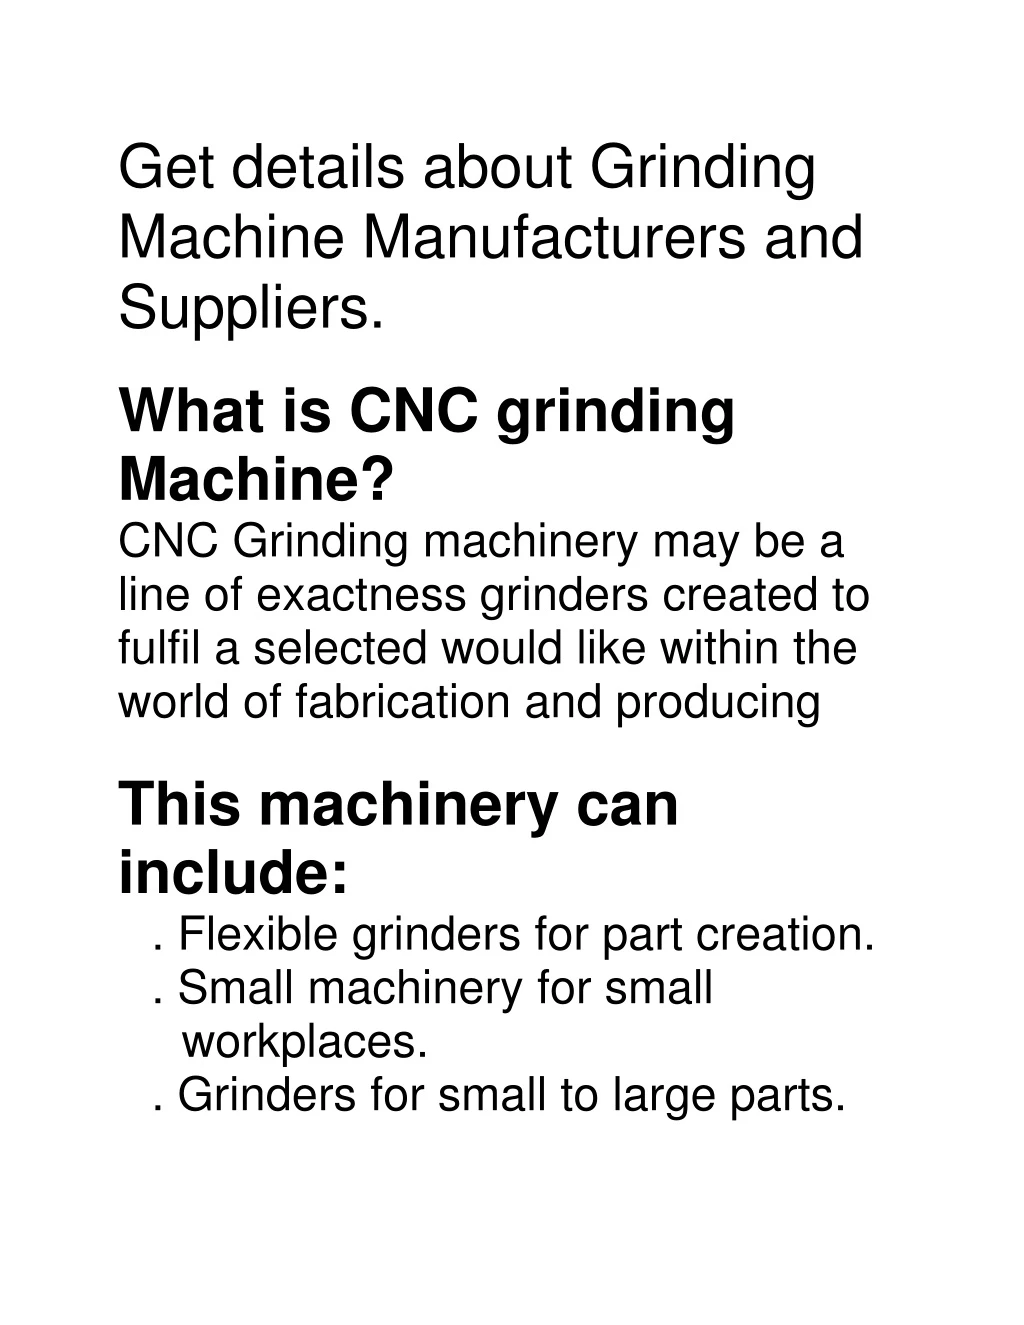 get details about grinding machine manufacturers